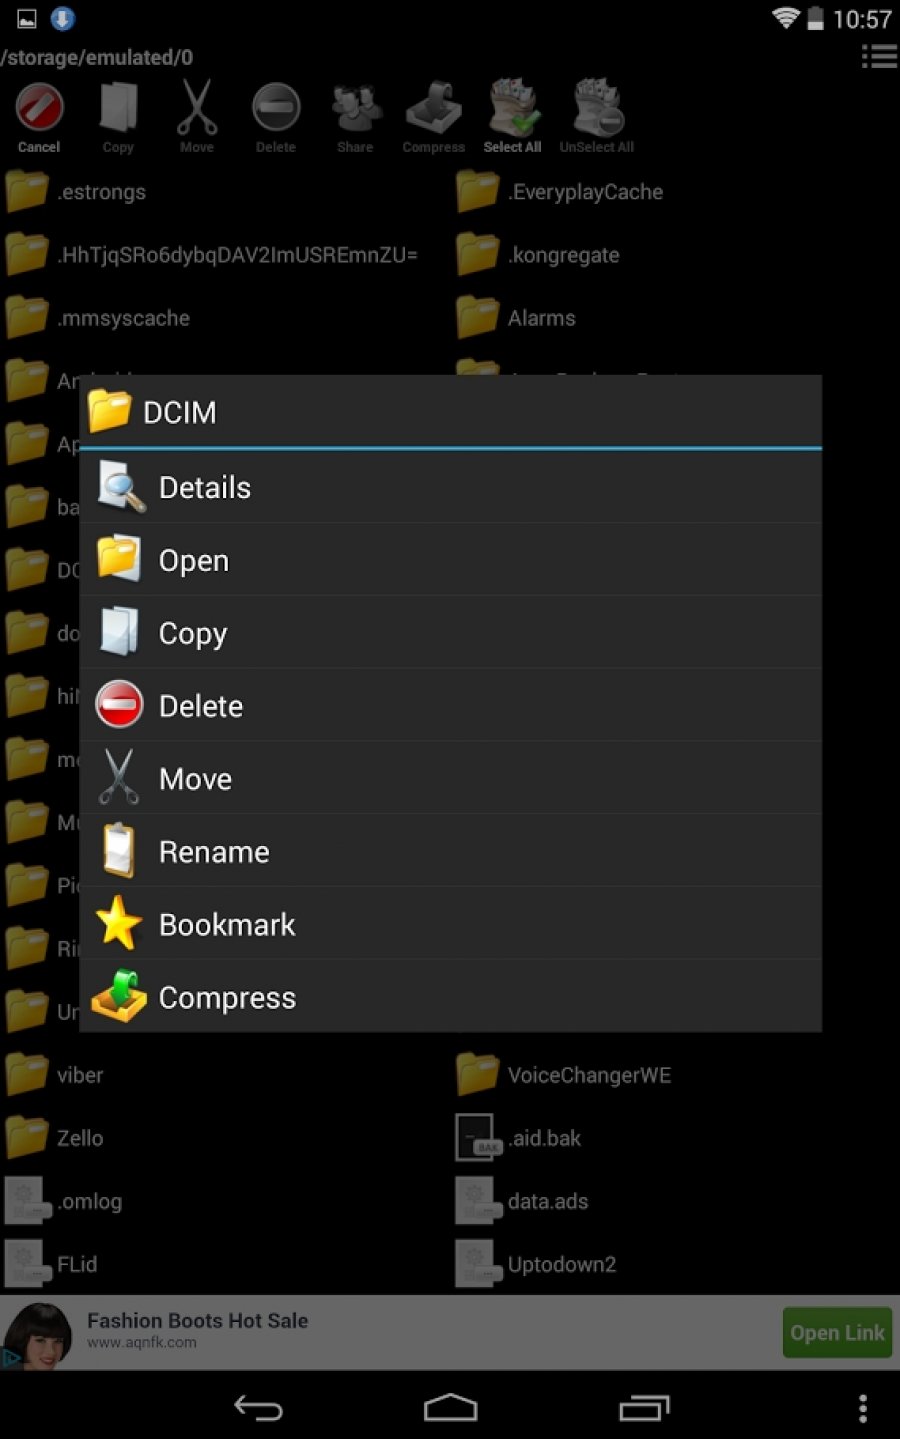 File Manager Apk For Android - Approm.org MOD Free Full Download Unlimited Money Gold Unlocked 